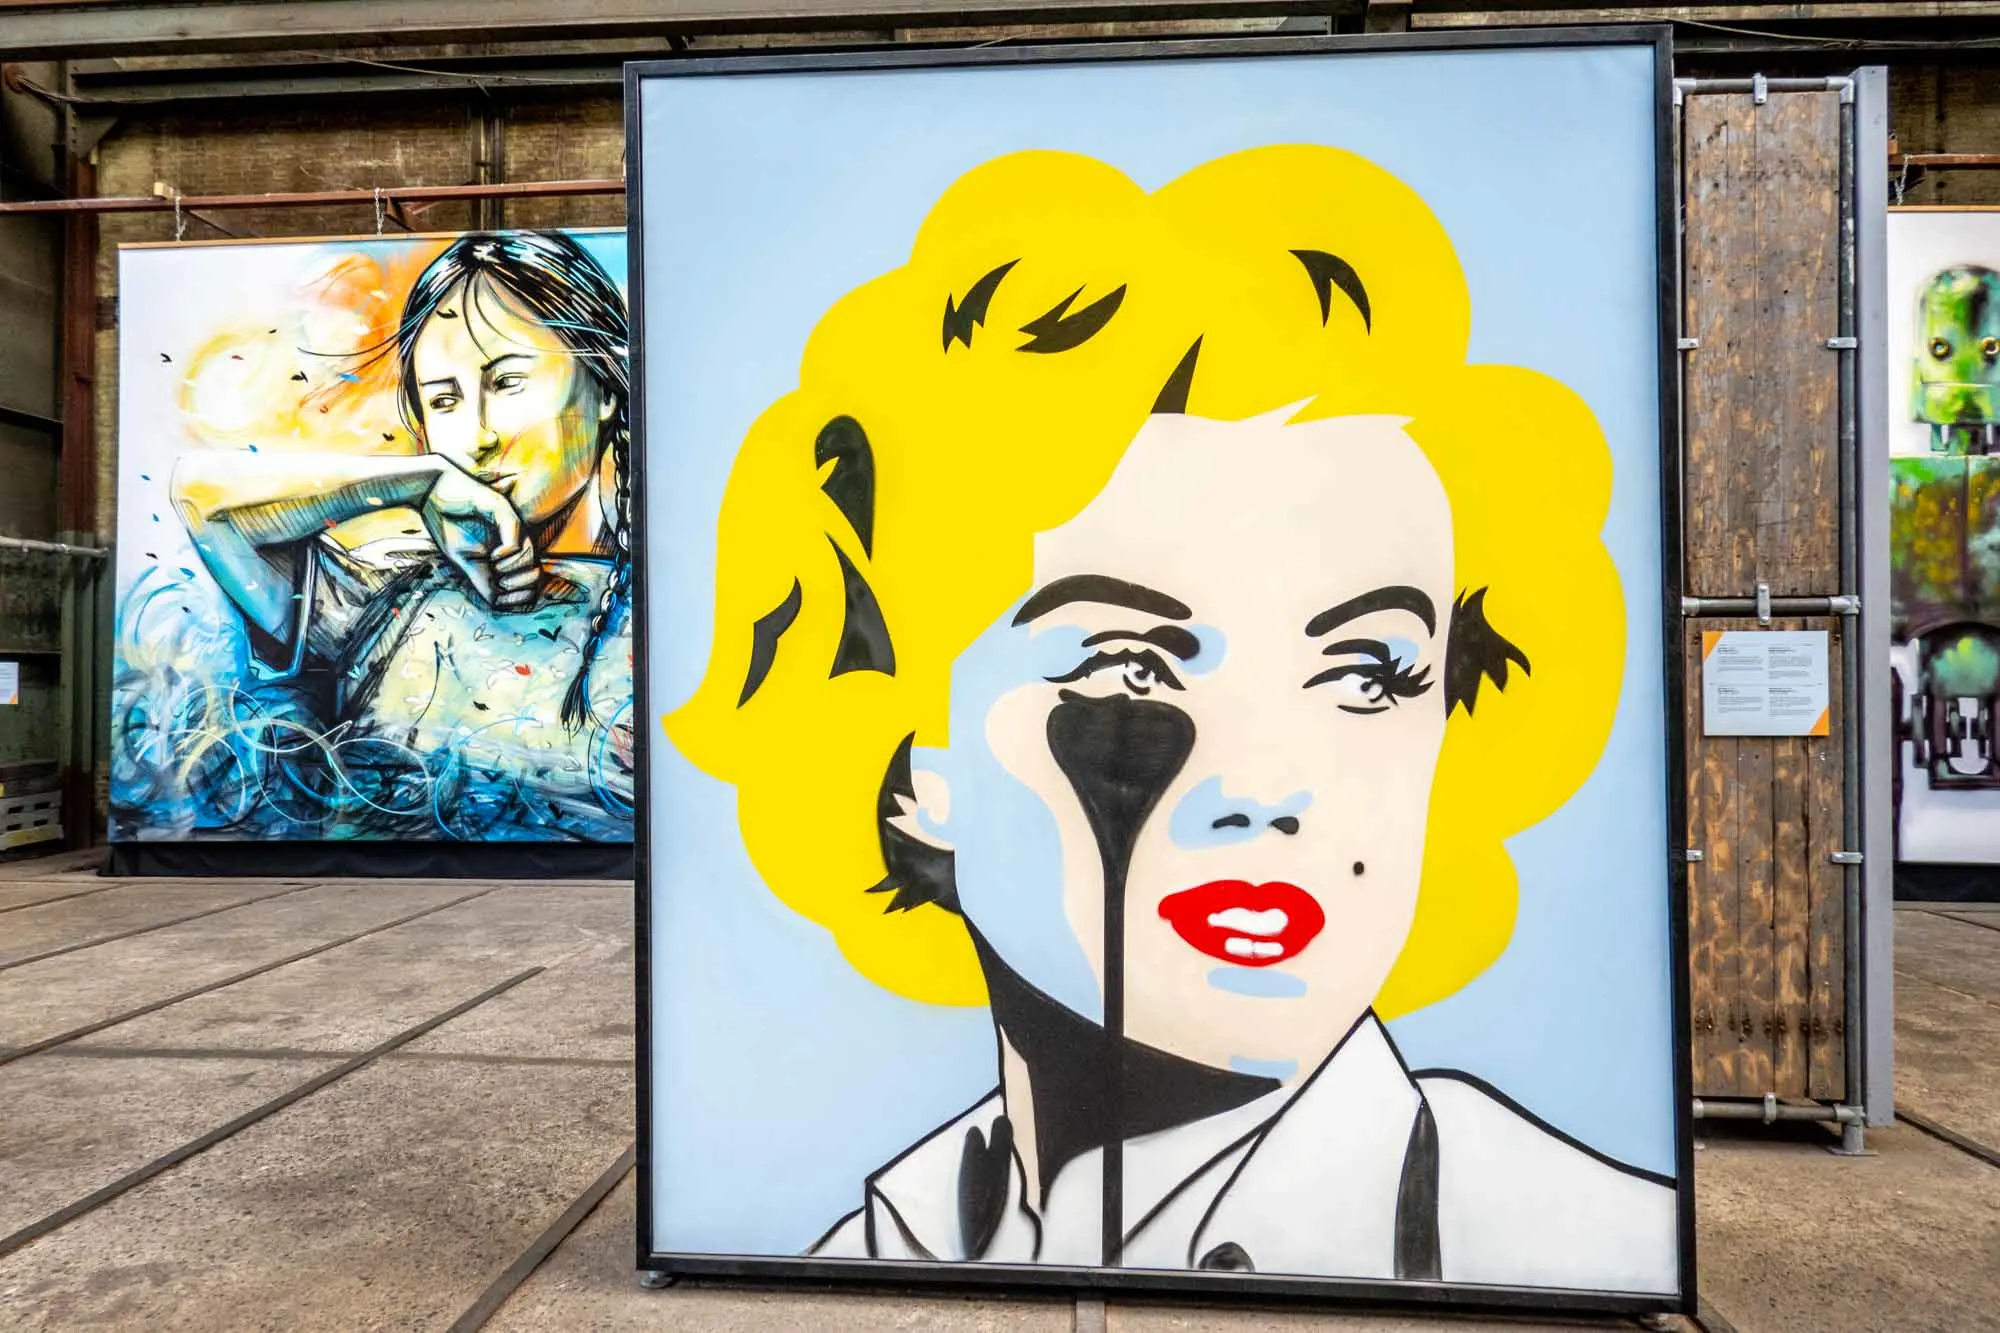 A Warhol-esque painting of Marilyn Monroe crying